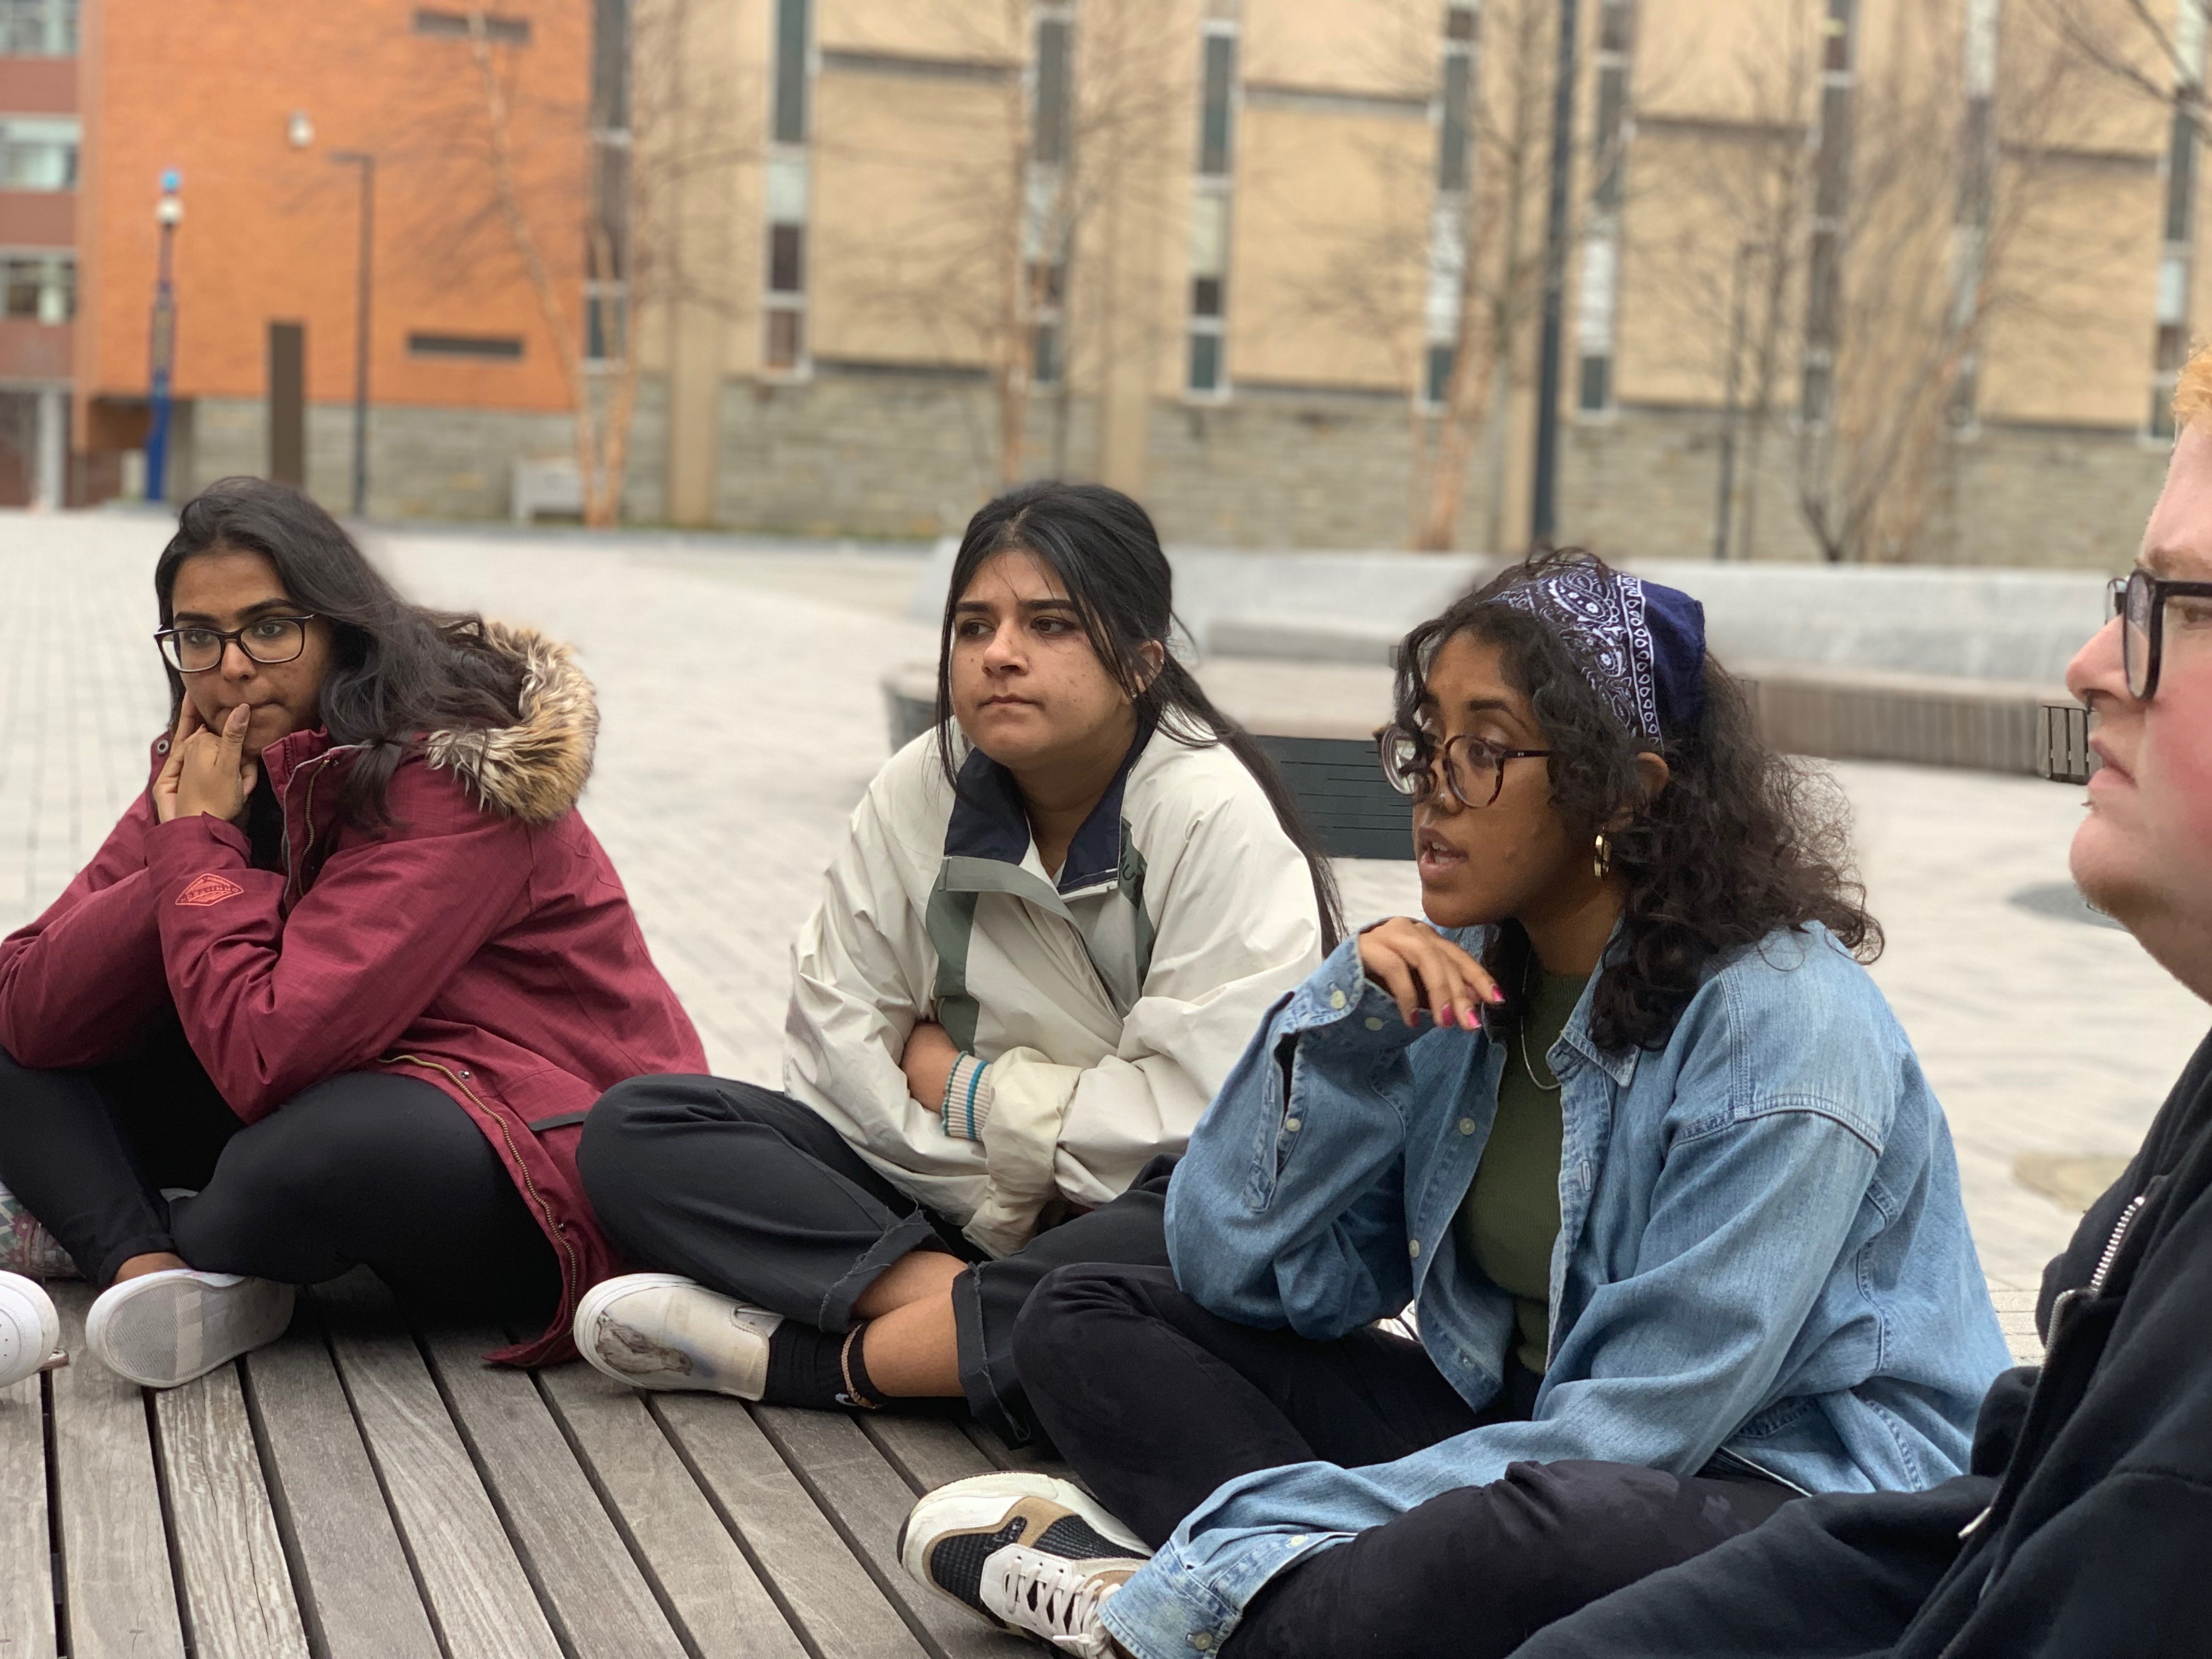 Image 5 - This photo shows Peer Readers in the process of working with ECCD. They are sitting outside, in a quad, and are a racially diverse group.